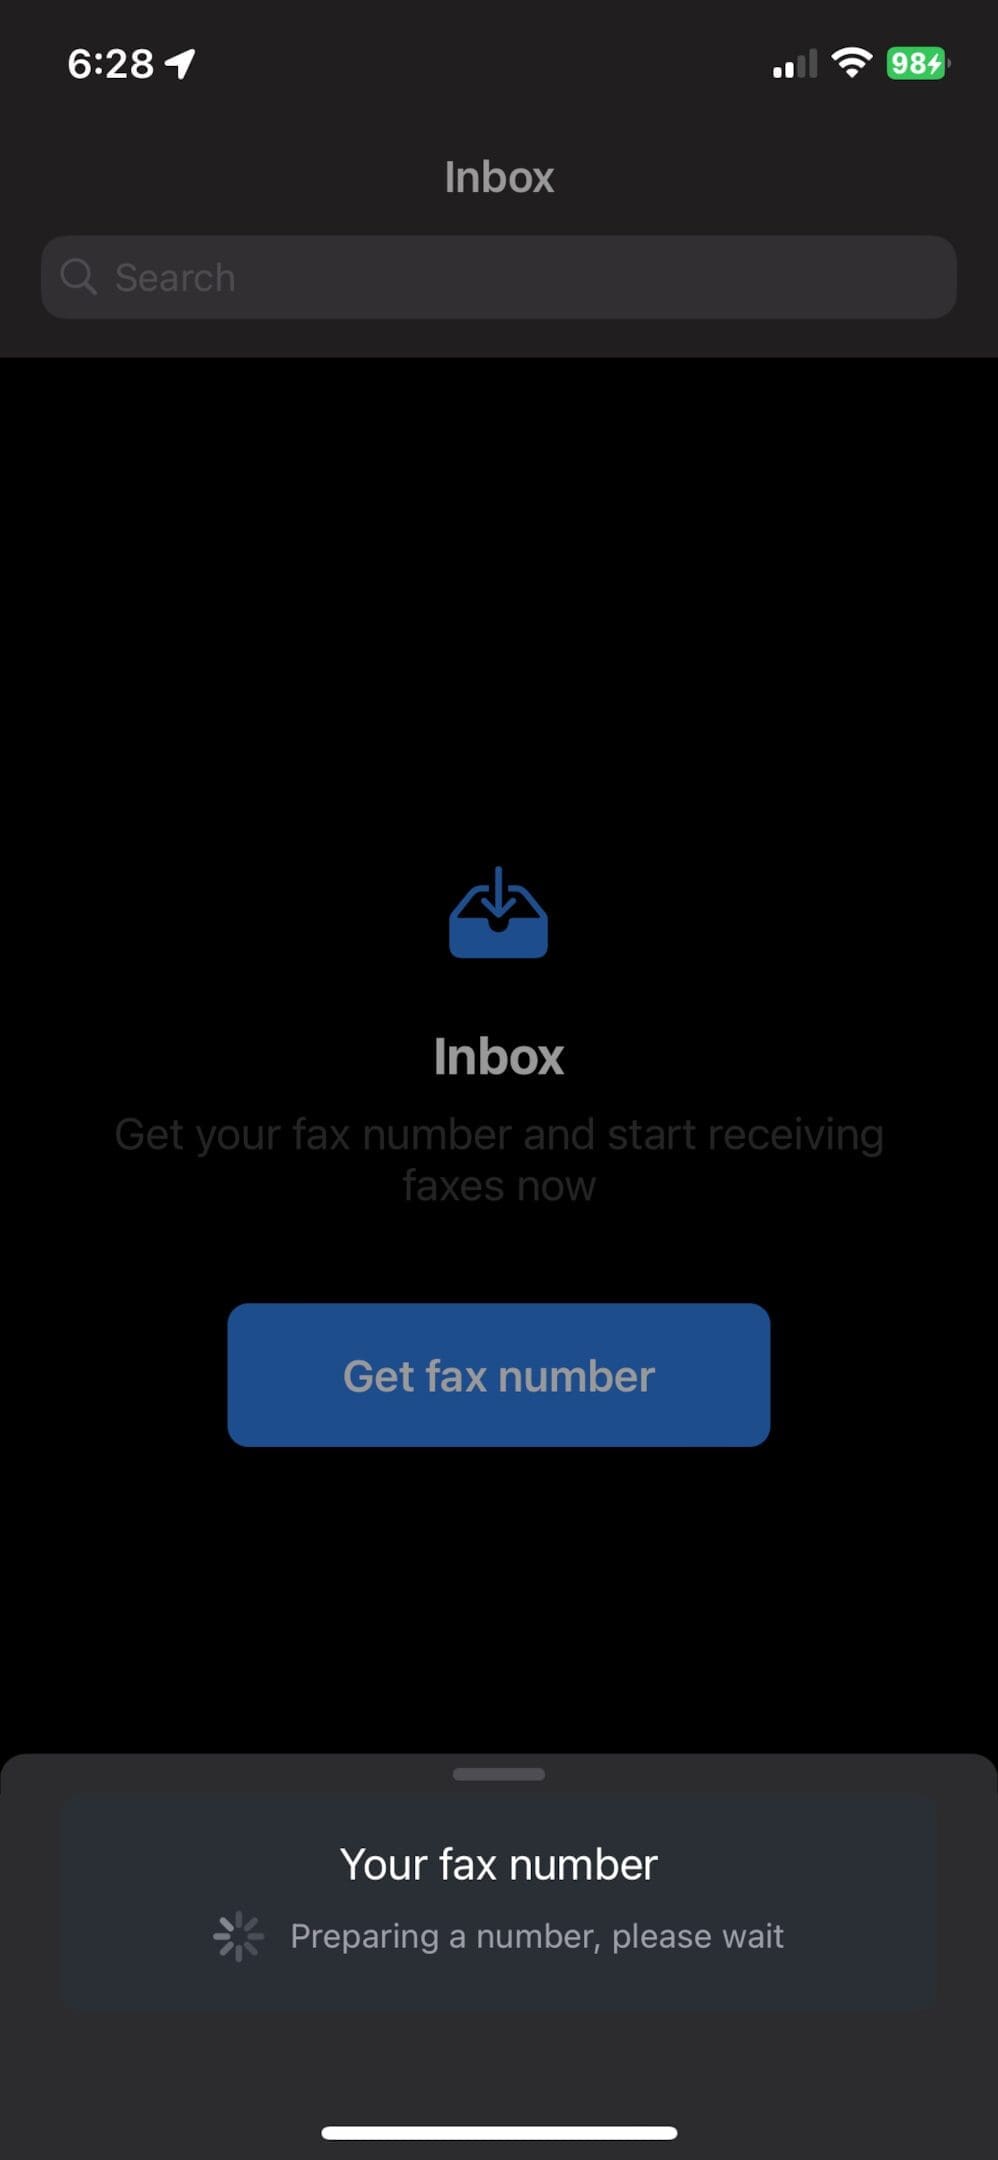 Generating fax number on Fax App